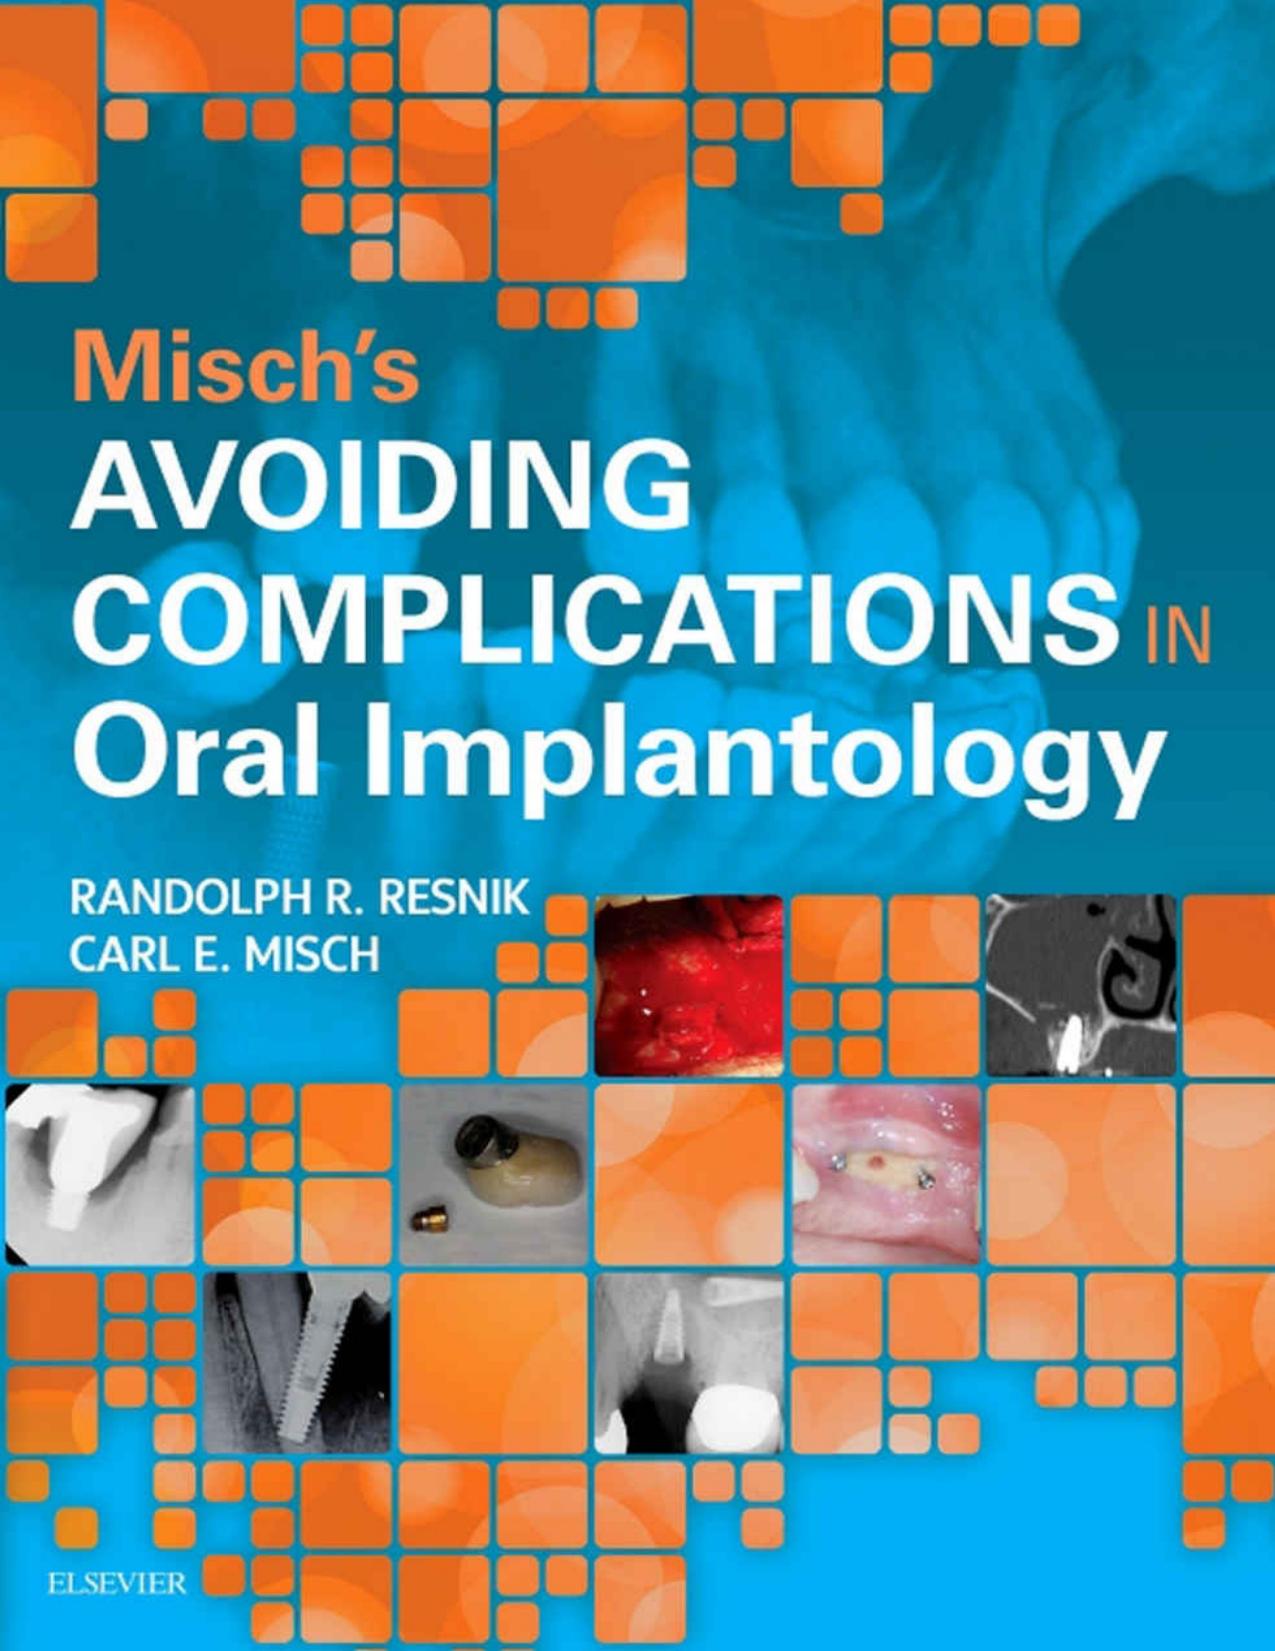 Misch's Avoiding Complications in Oral Implantology - E-Book